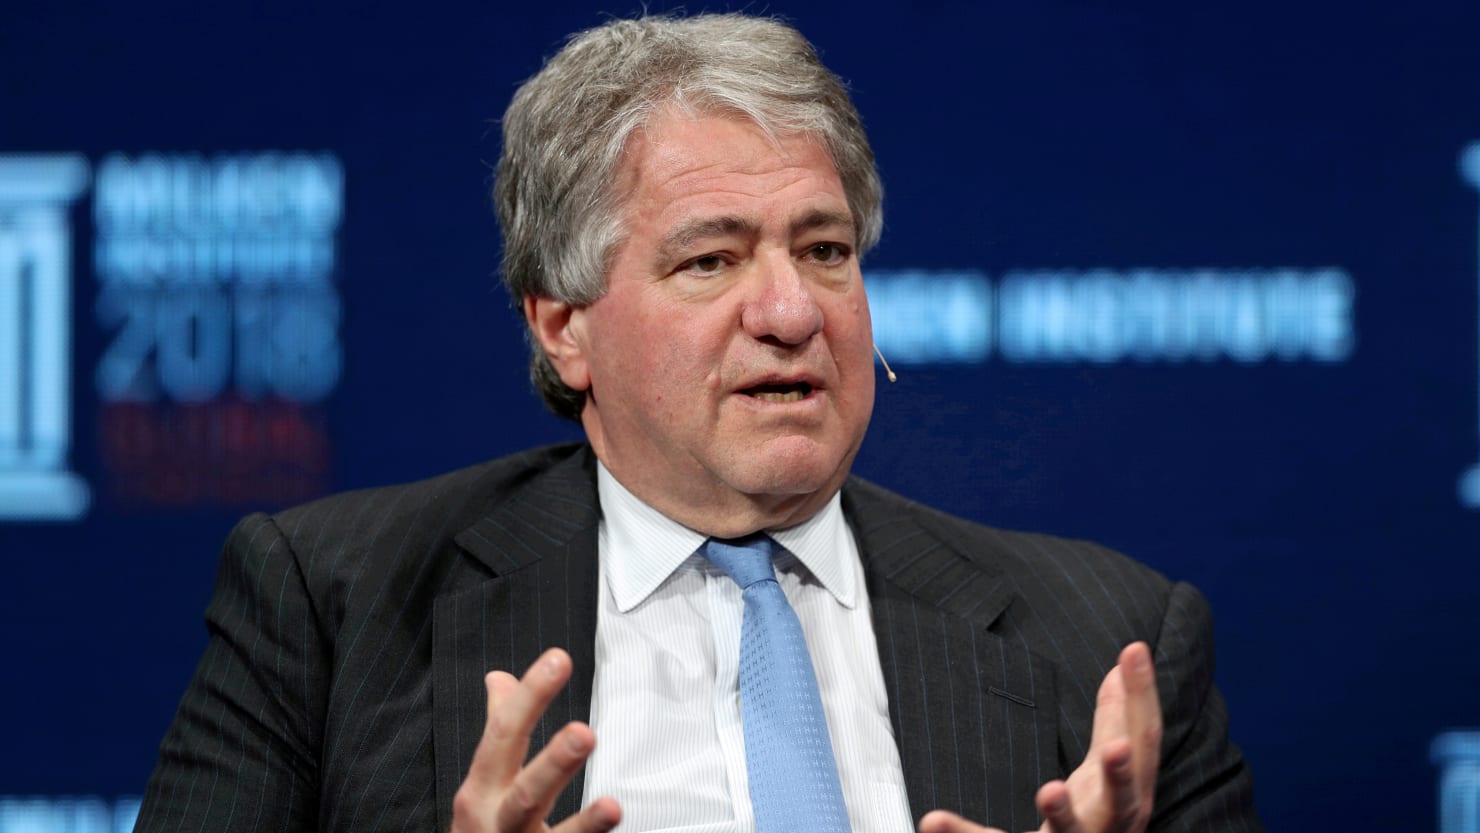 Billionaire investor Leon Black sued for defamation by woman claiming he forced her into ‘sadistic sexual acts’